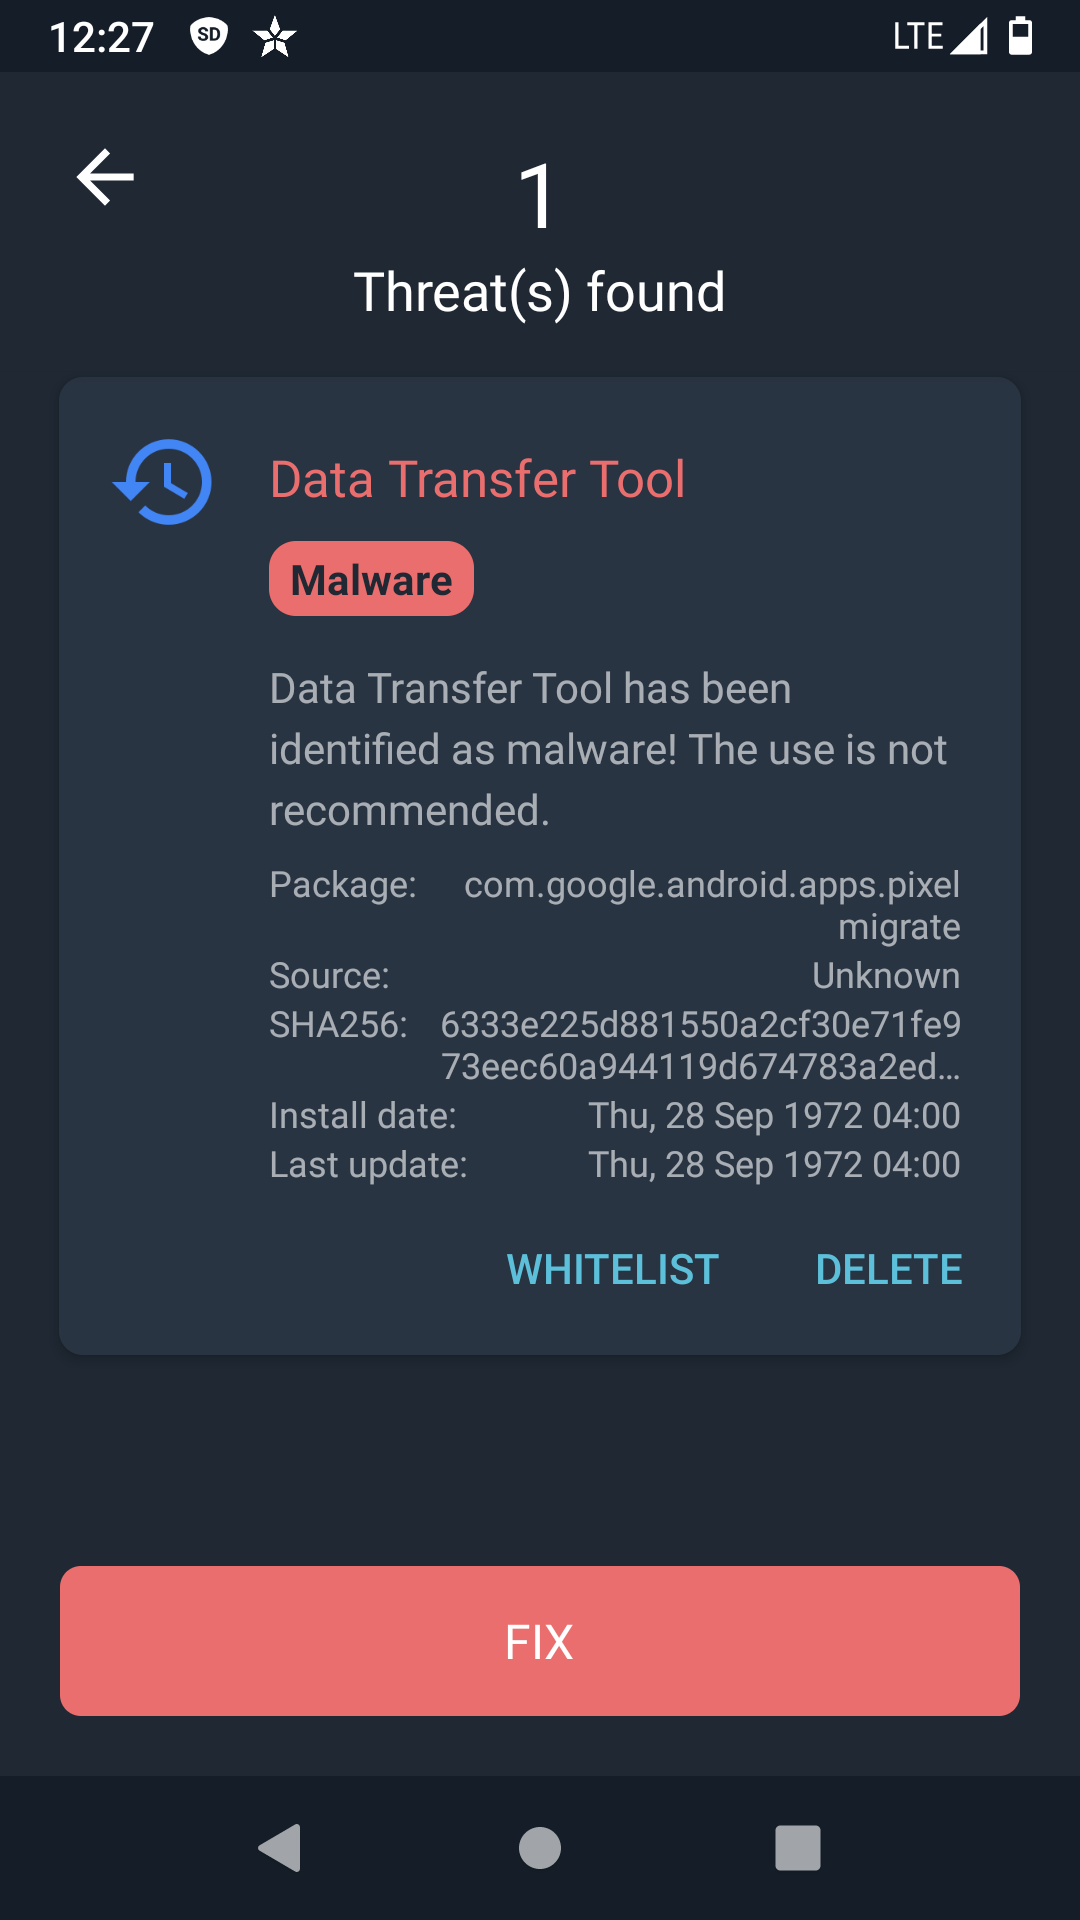 Screen grab of Spyware Detector showing Data Transfer Tool as threat found.